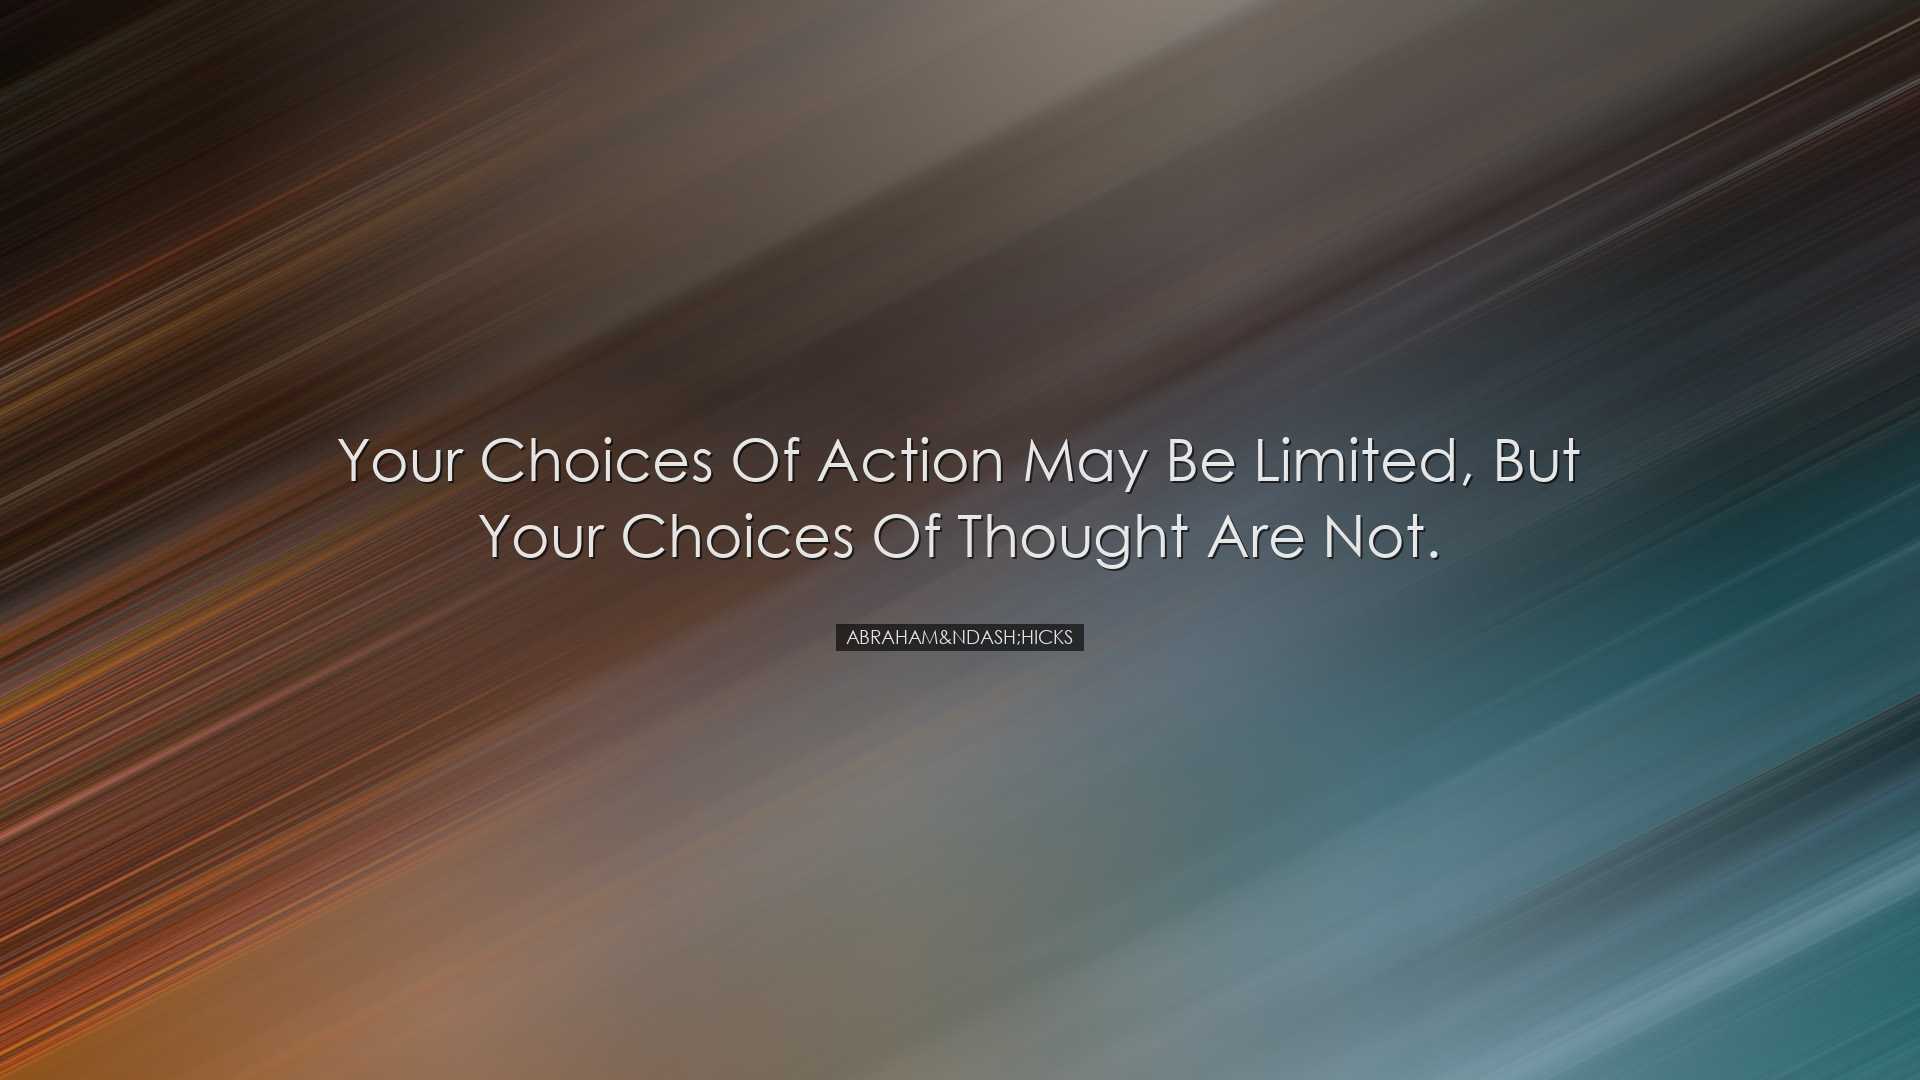 Your choices of action may be limited, but your choices of thought